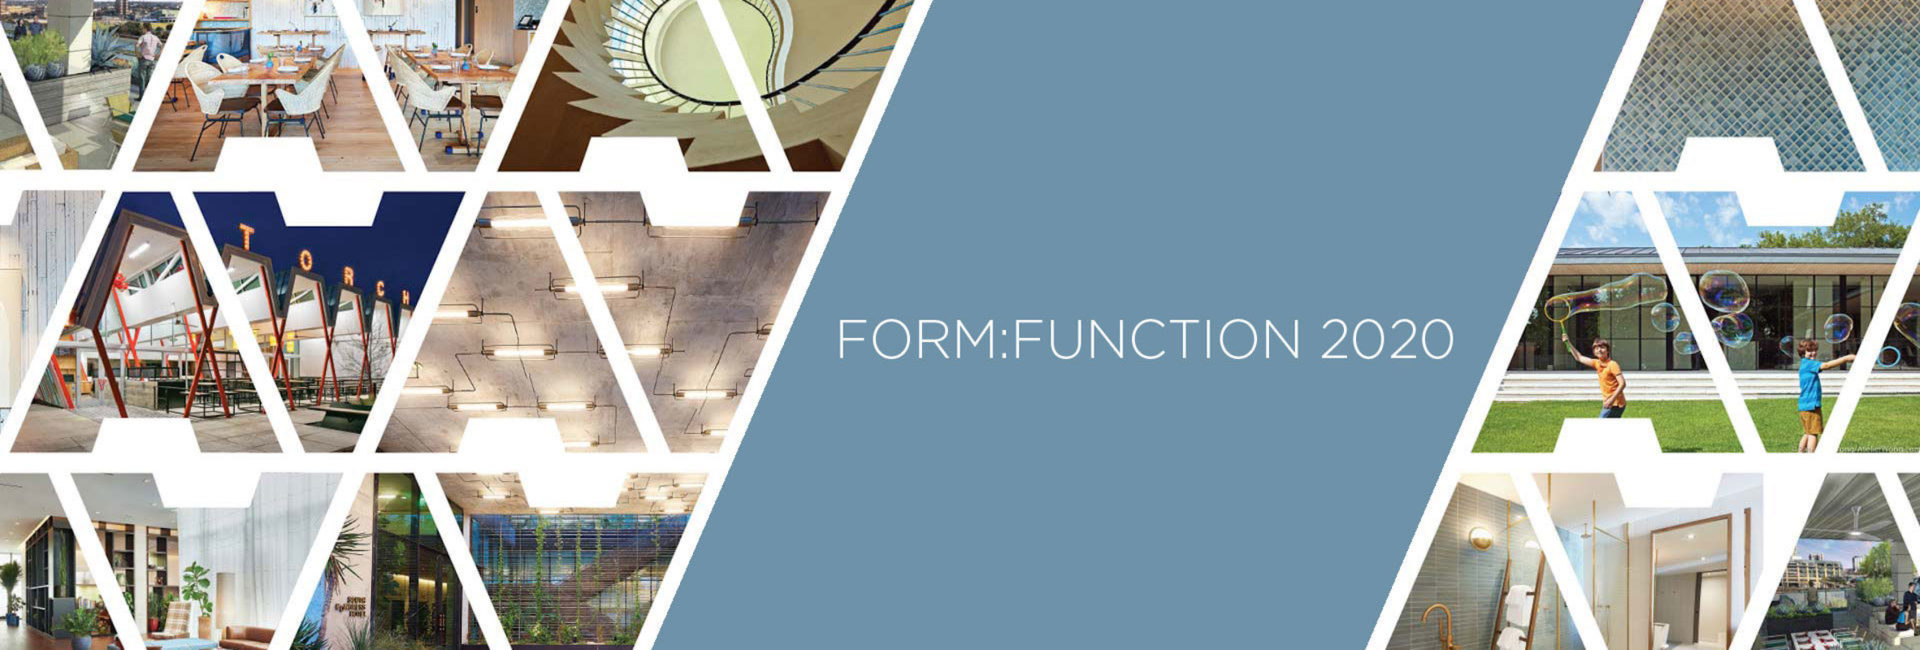 Austin Foundation for Architecture - Form:Function 2020